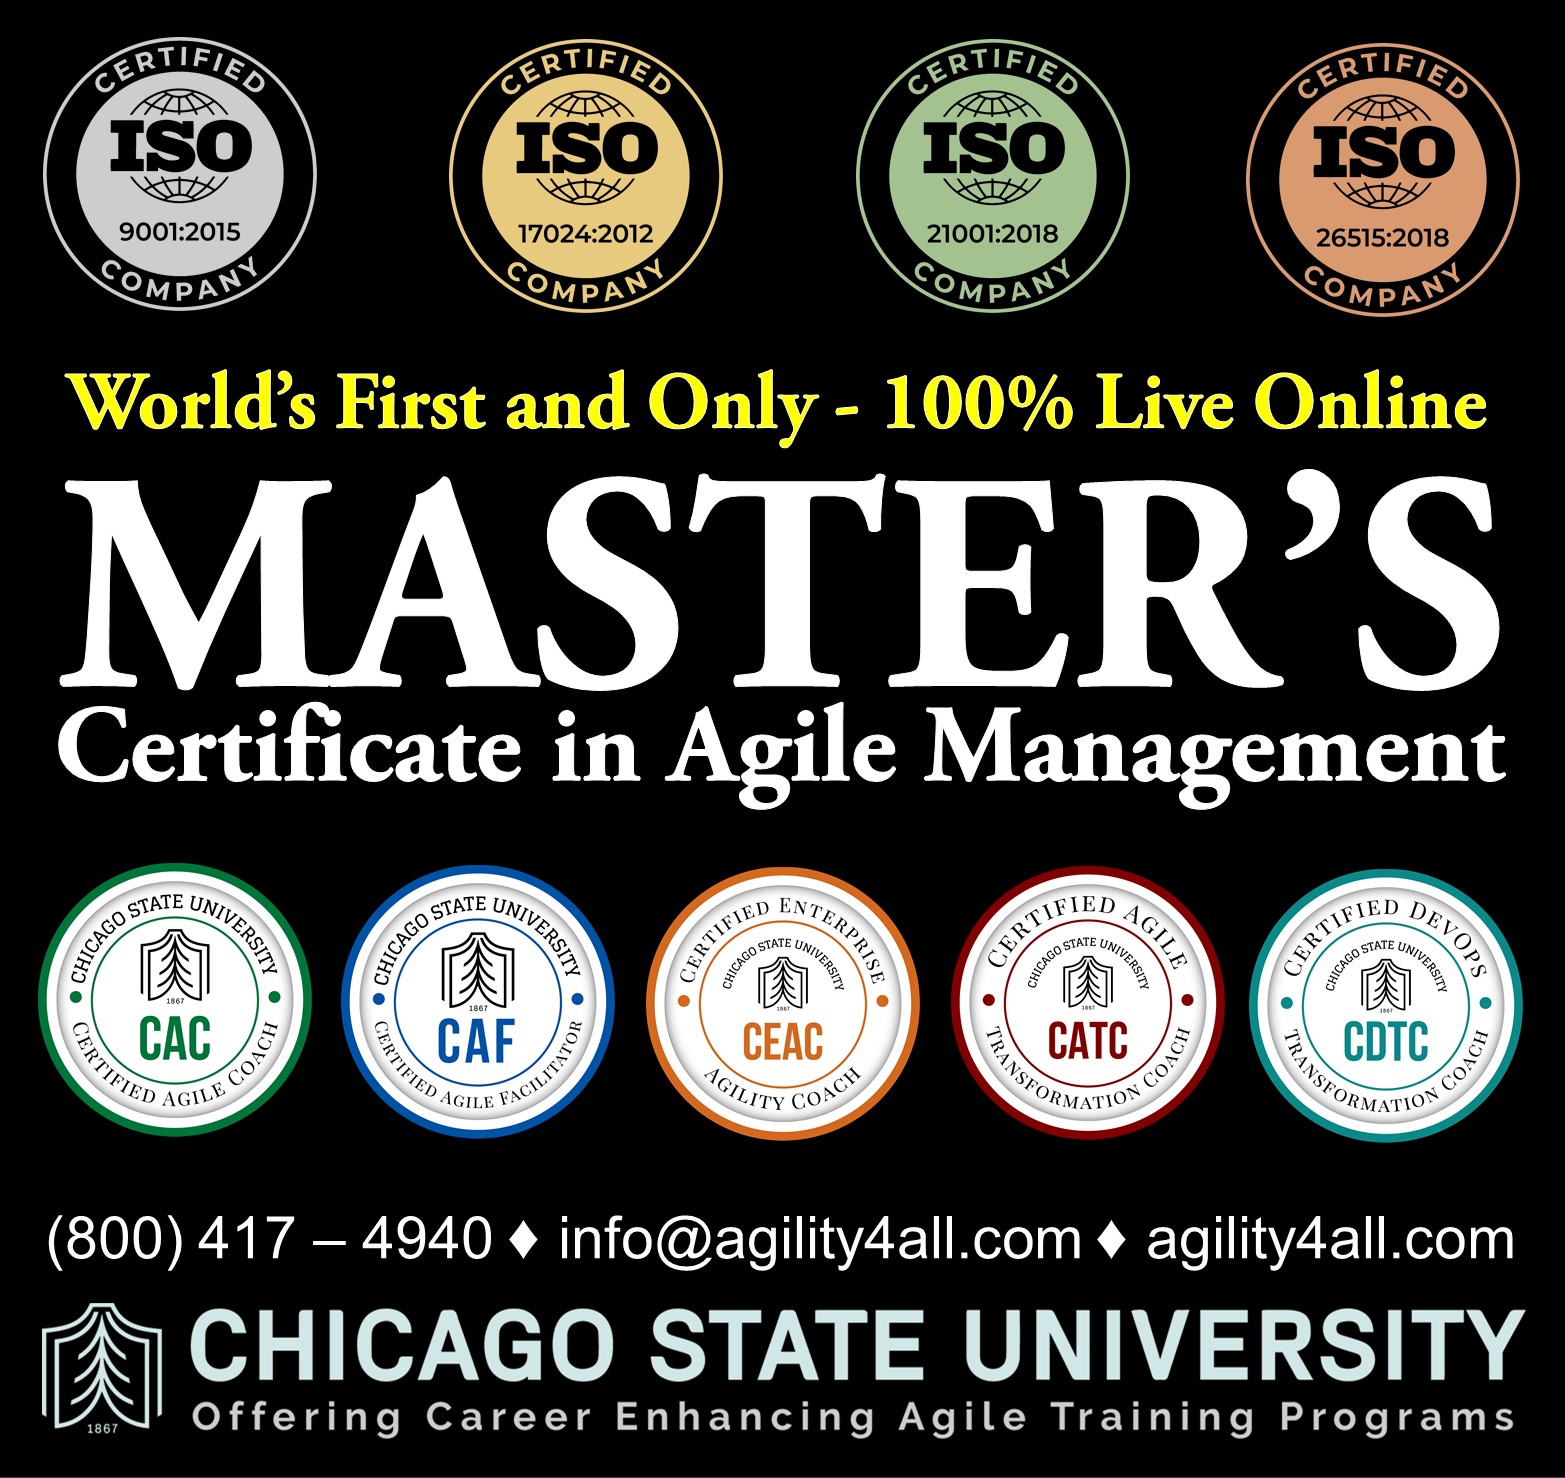 Agile Training Programs from Chicago State University